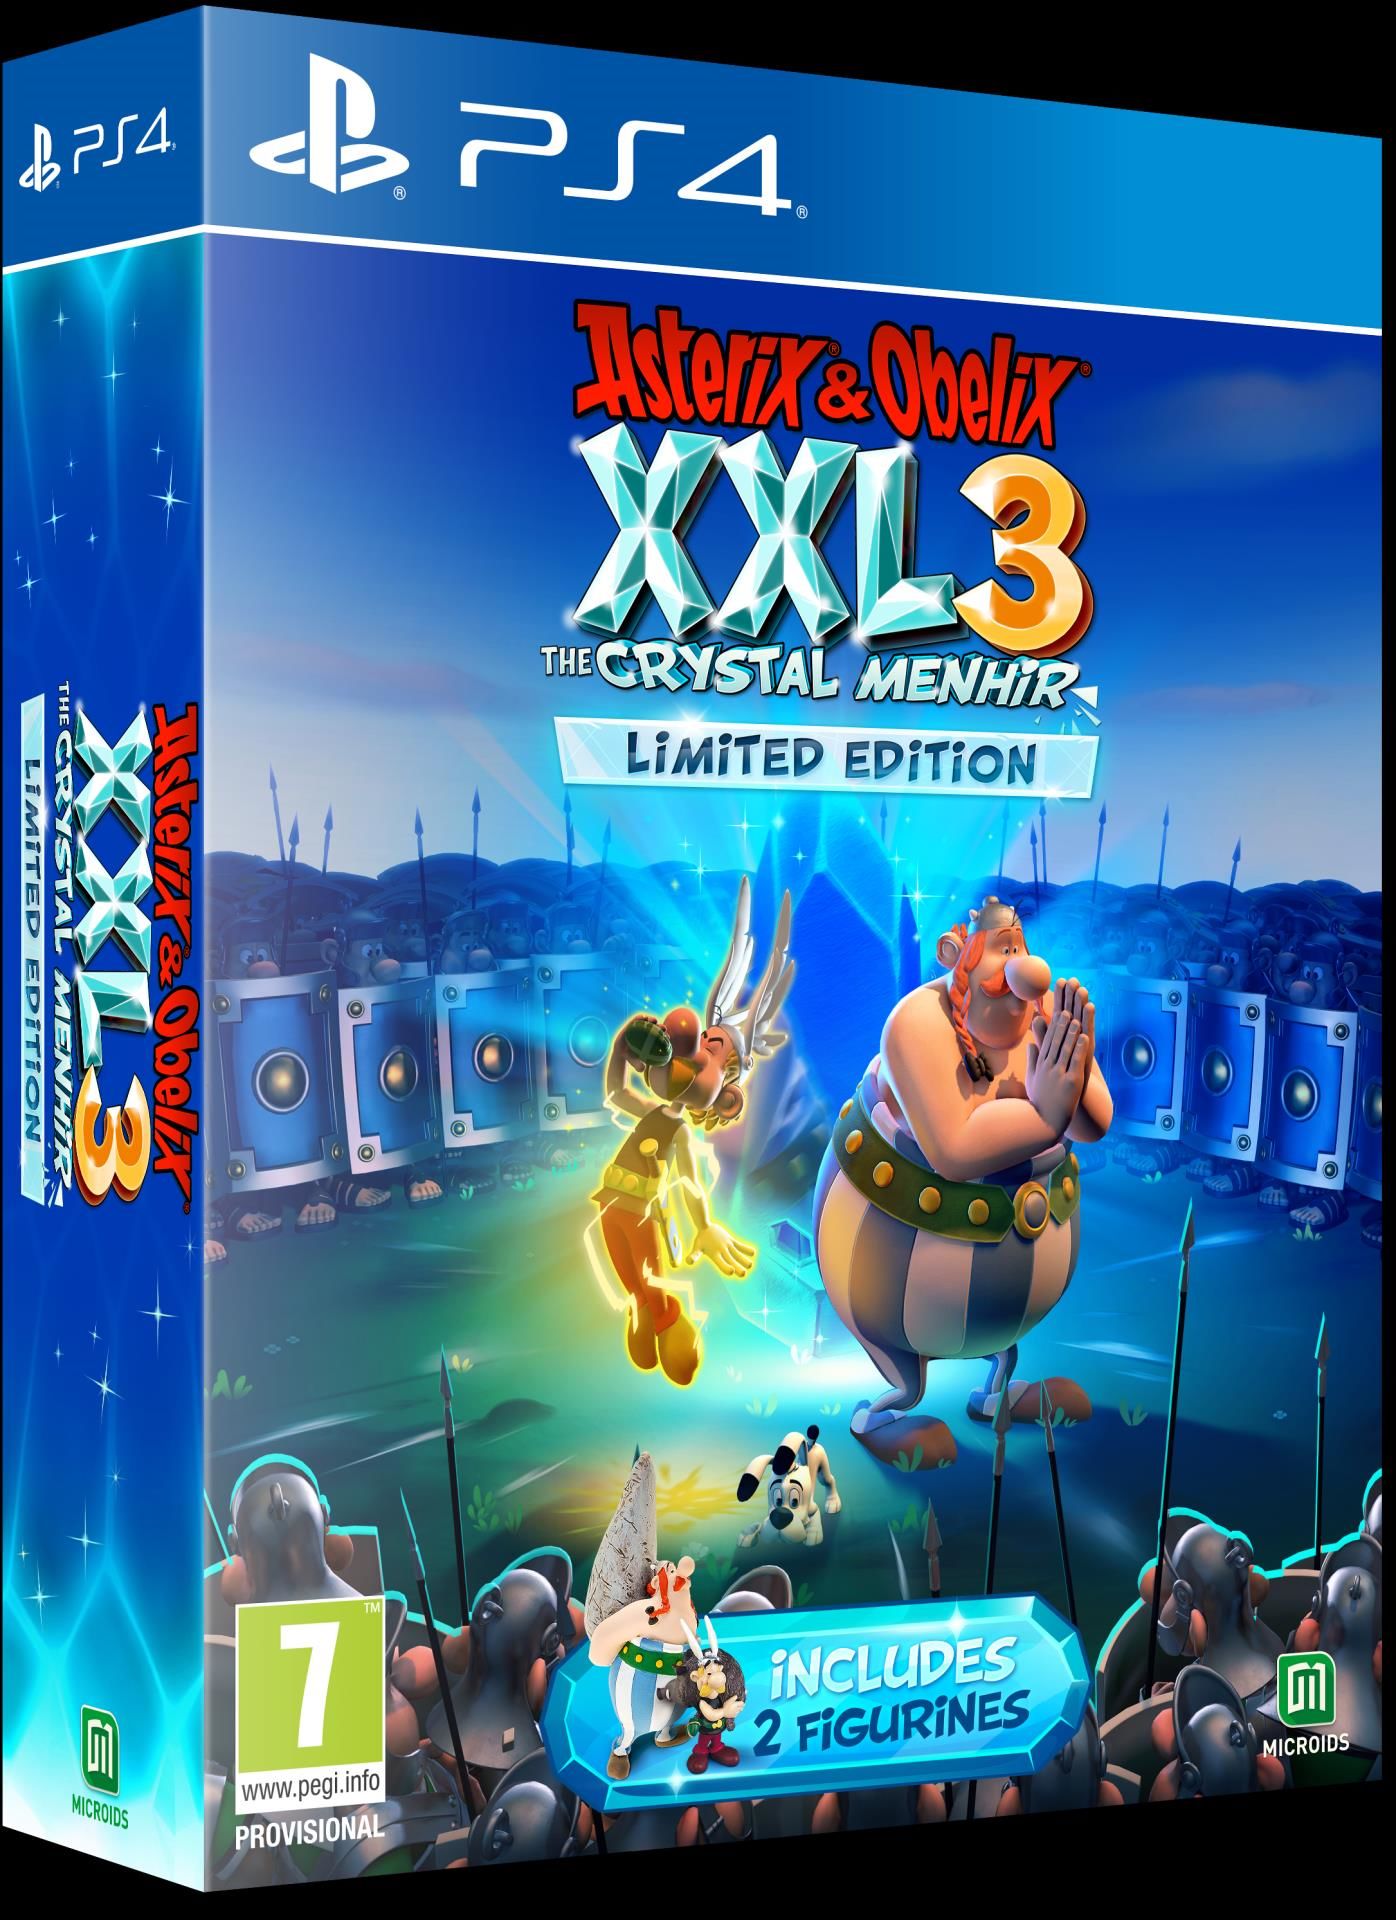 Asterix & Obelix XXL 3: The Crystal Menhir Limited Edition